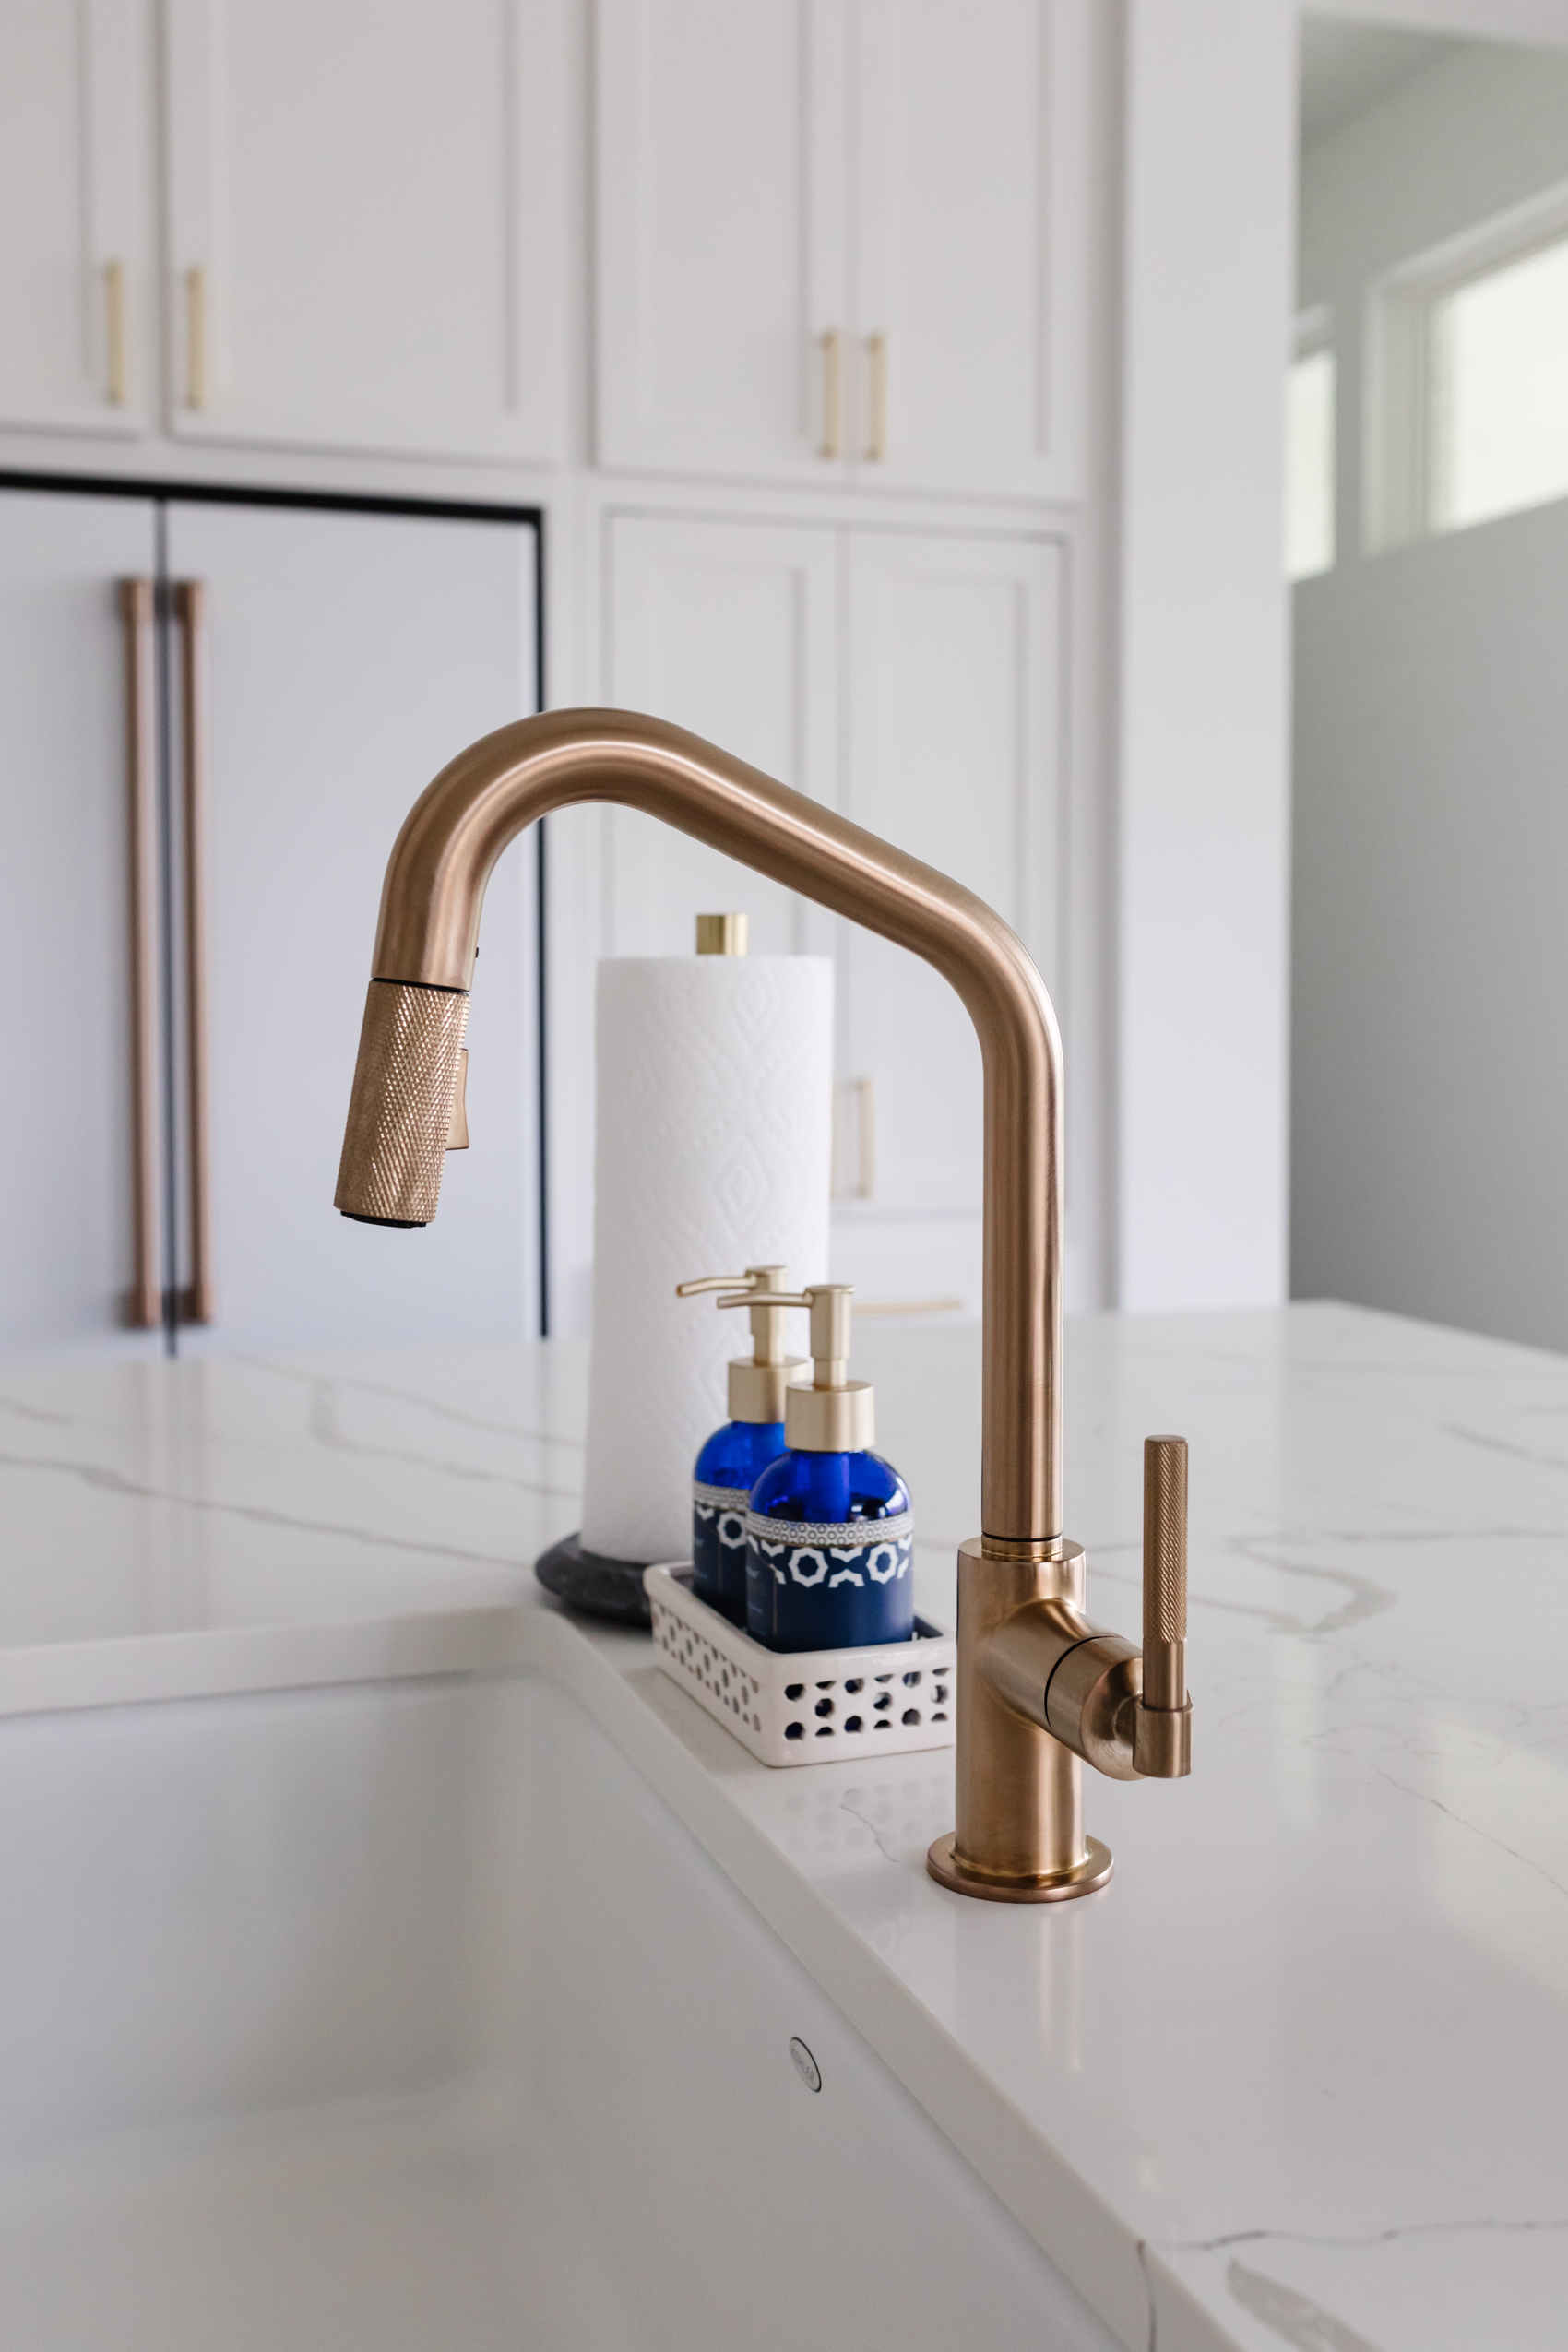 Brizo Litze Angled Pull Down faucet with knurled handle, Kohler Whitehaven farmhouse sink in a transitional kitchen